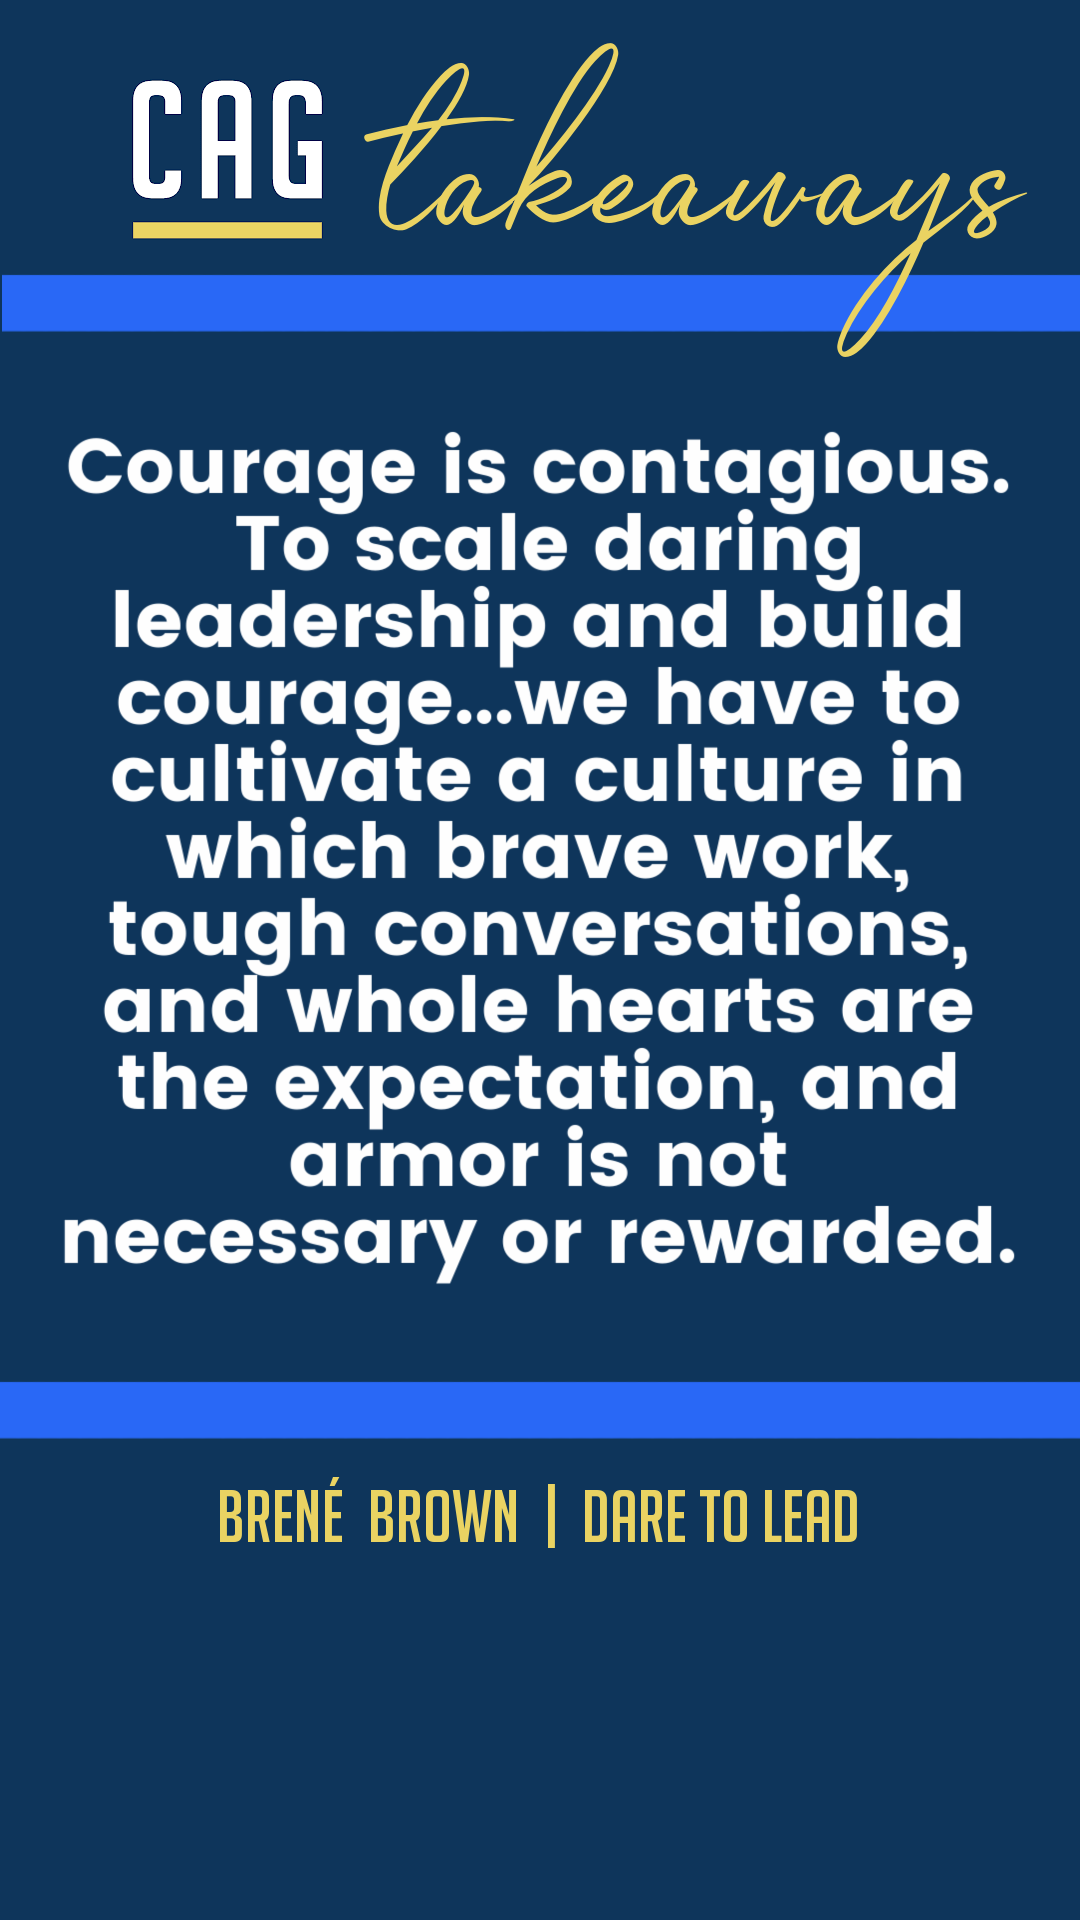 Courage and the Heart of Daring Leadership - Courage is Contagious